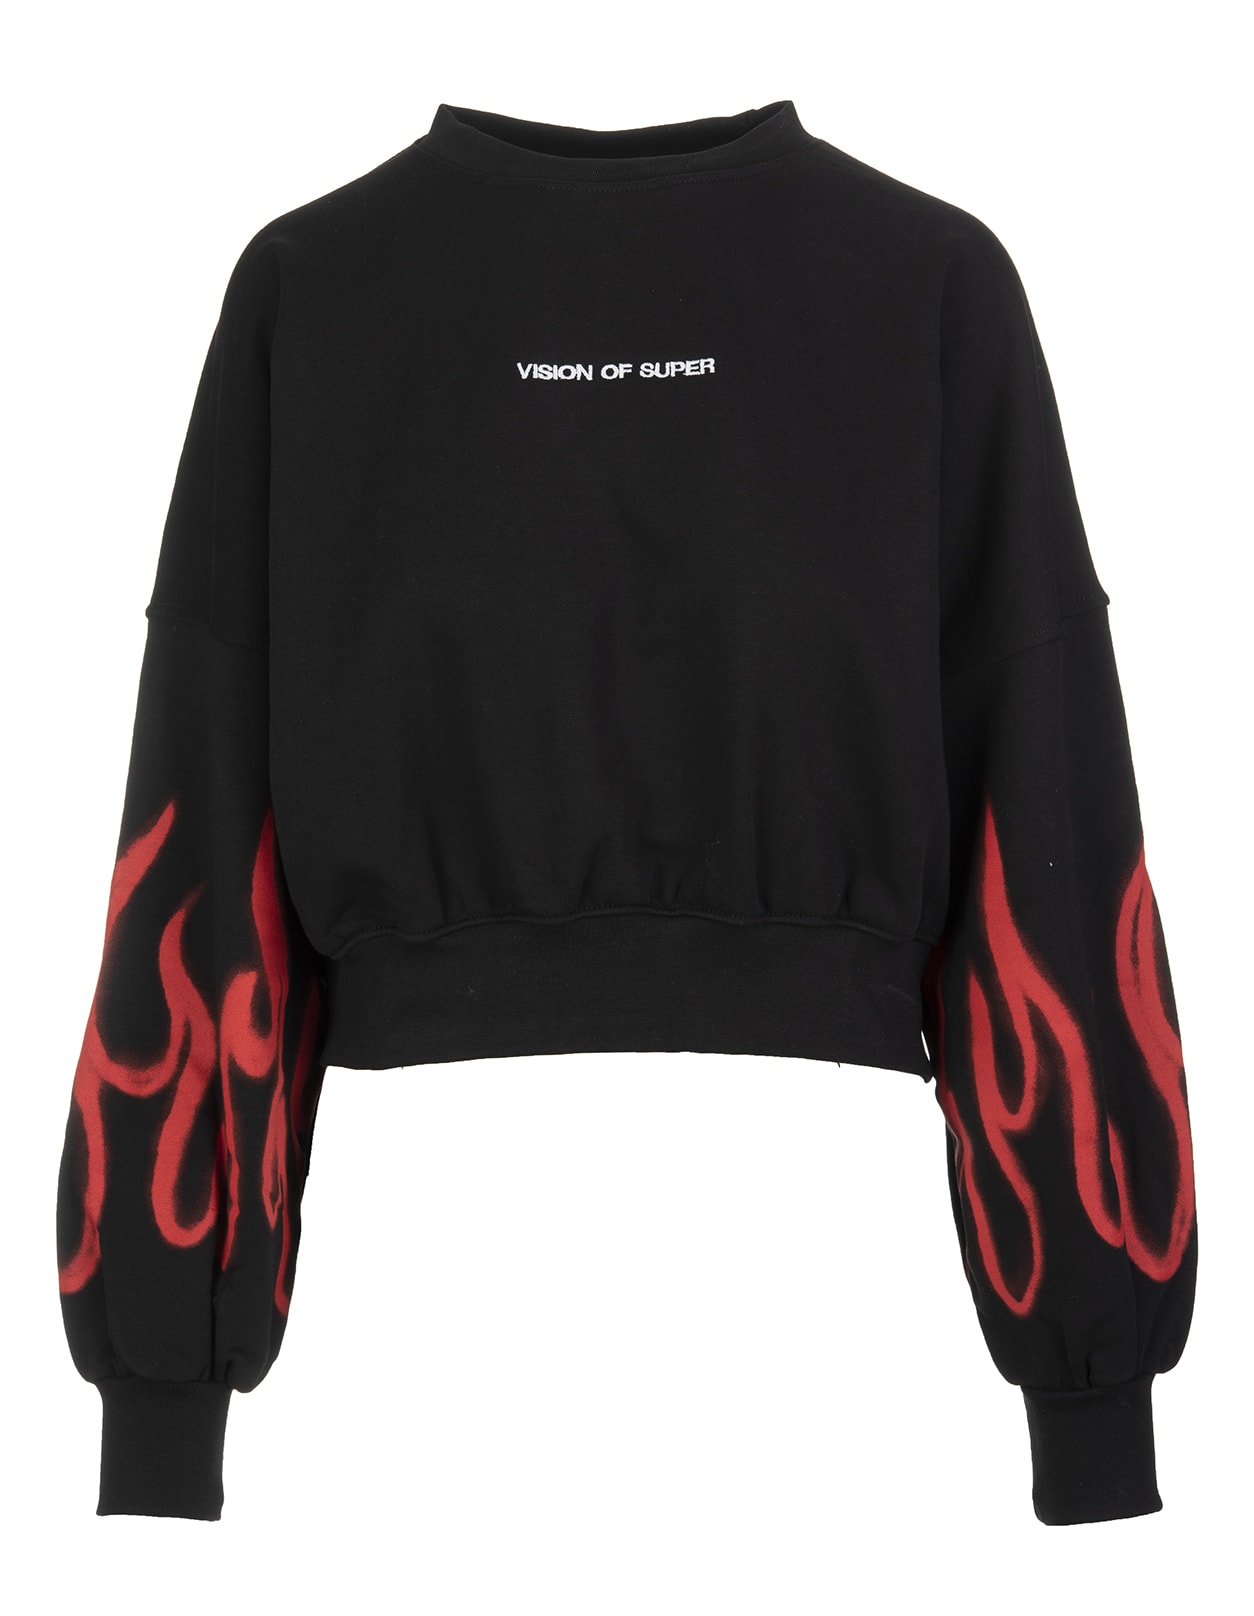 Vision of Super Woman Black Sweatshirt With Red Spray Flames